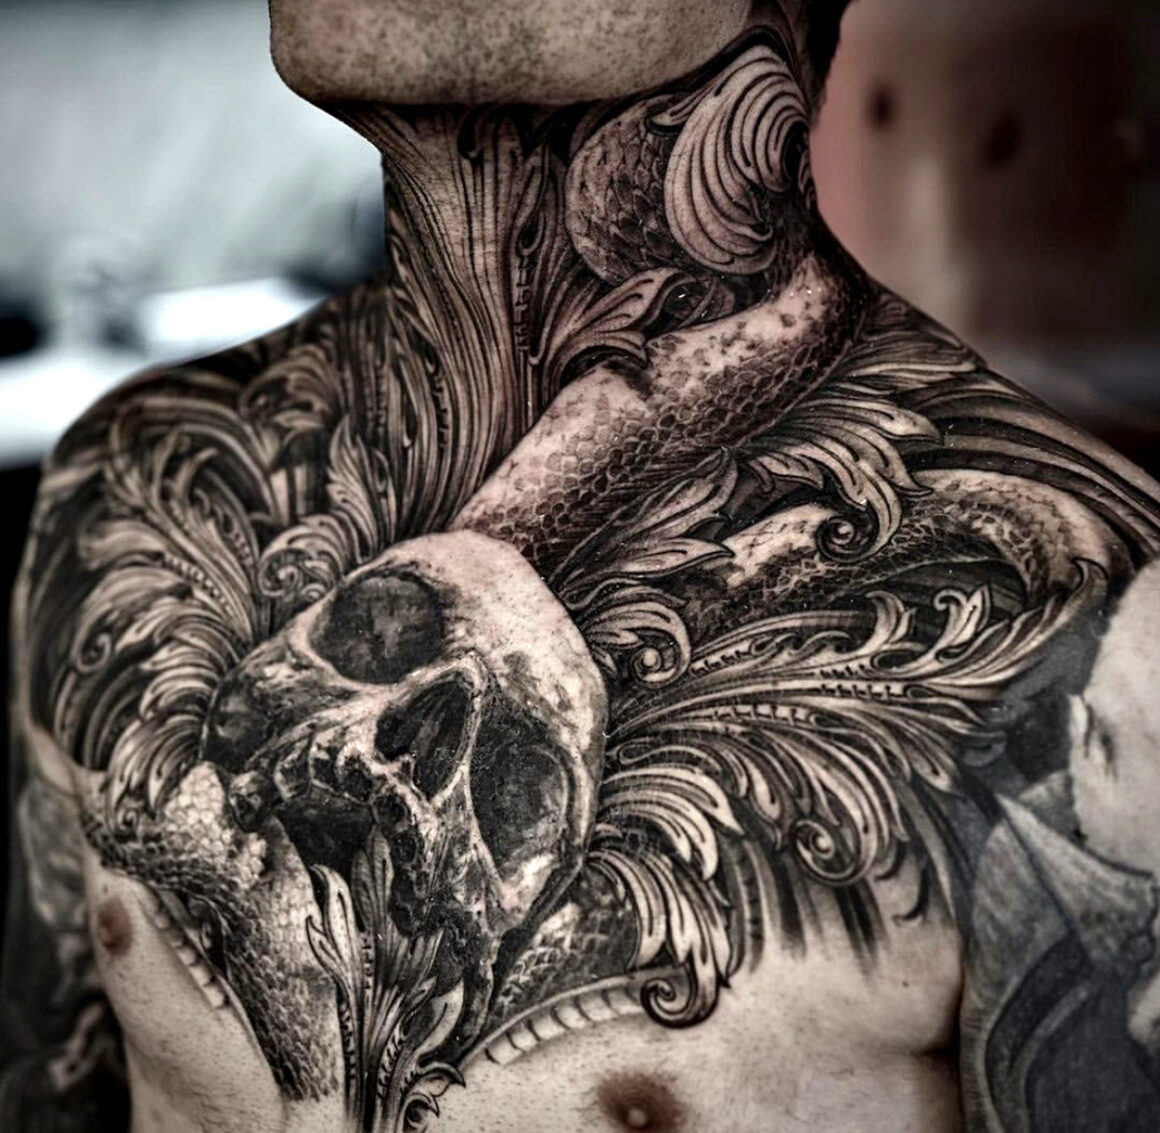 Tattoo by Mads Thill, @madsthill